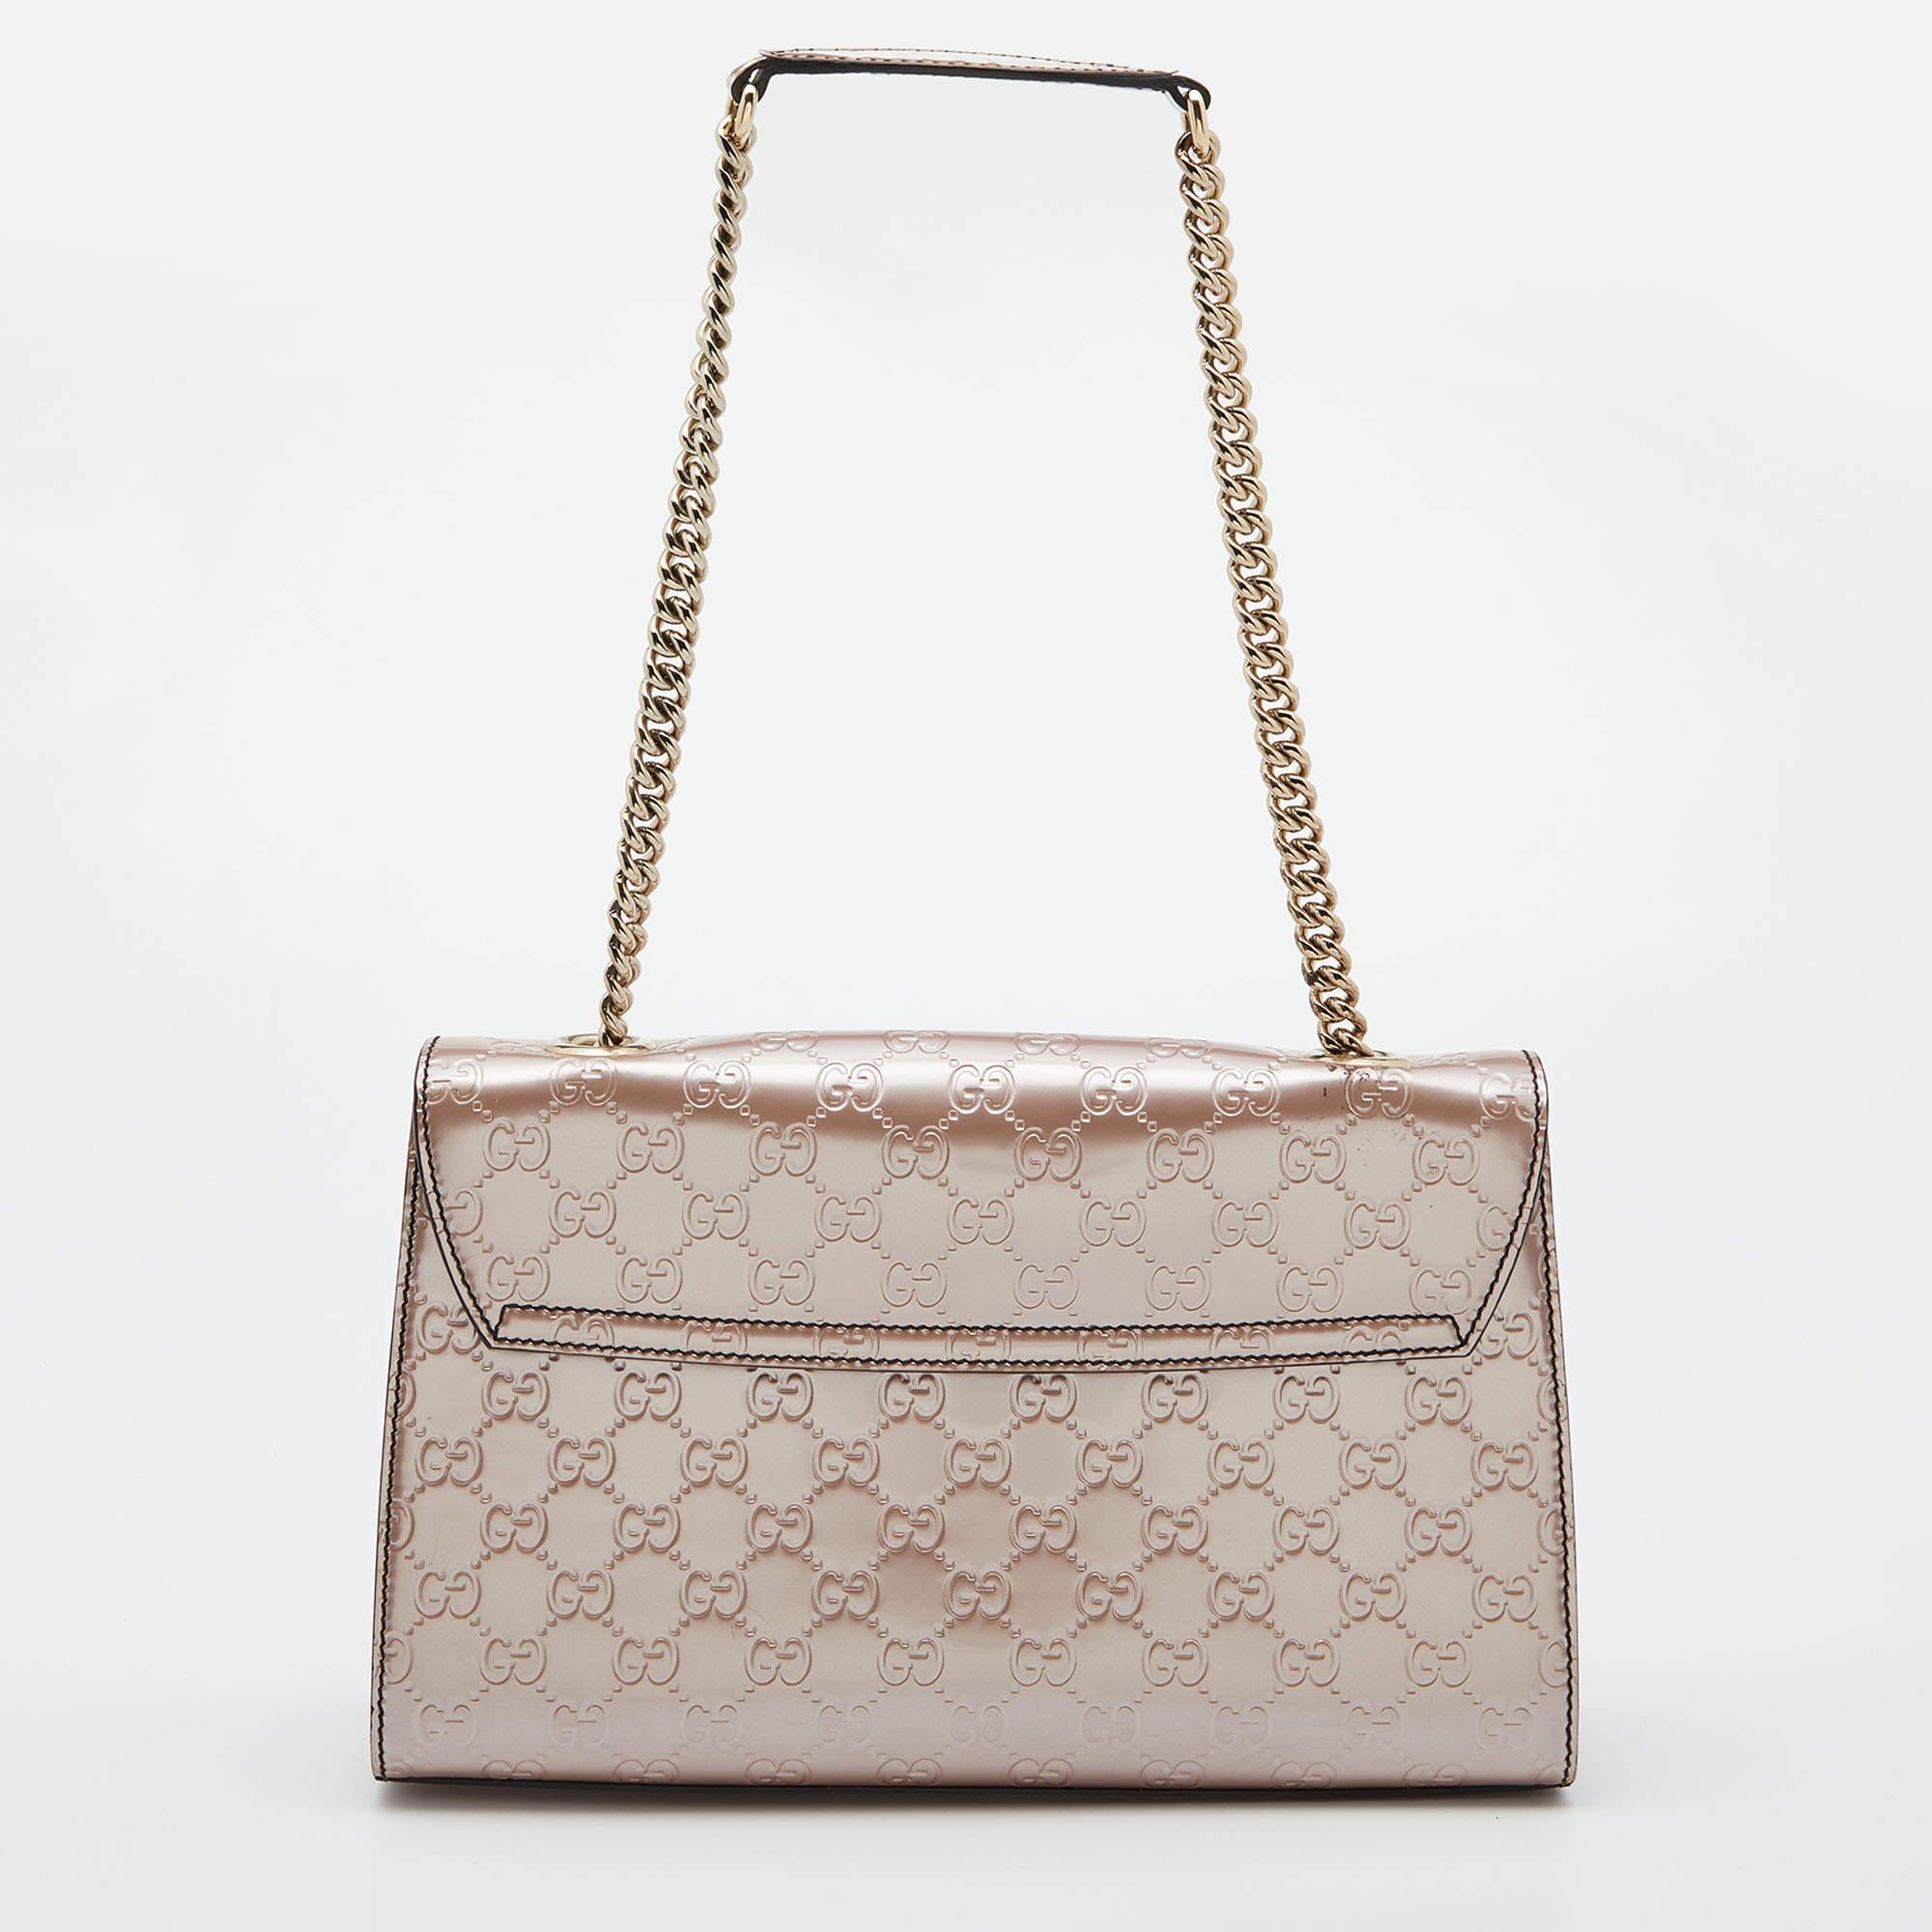 With a perfect blend of archival details and contemporary design, this Gucci Emily bag is desirable. It has impressed the style enthusiasts with its understated charm and embodies an architectural shape. Made from Guccissima patent leather, it can